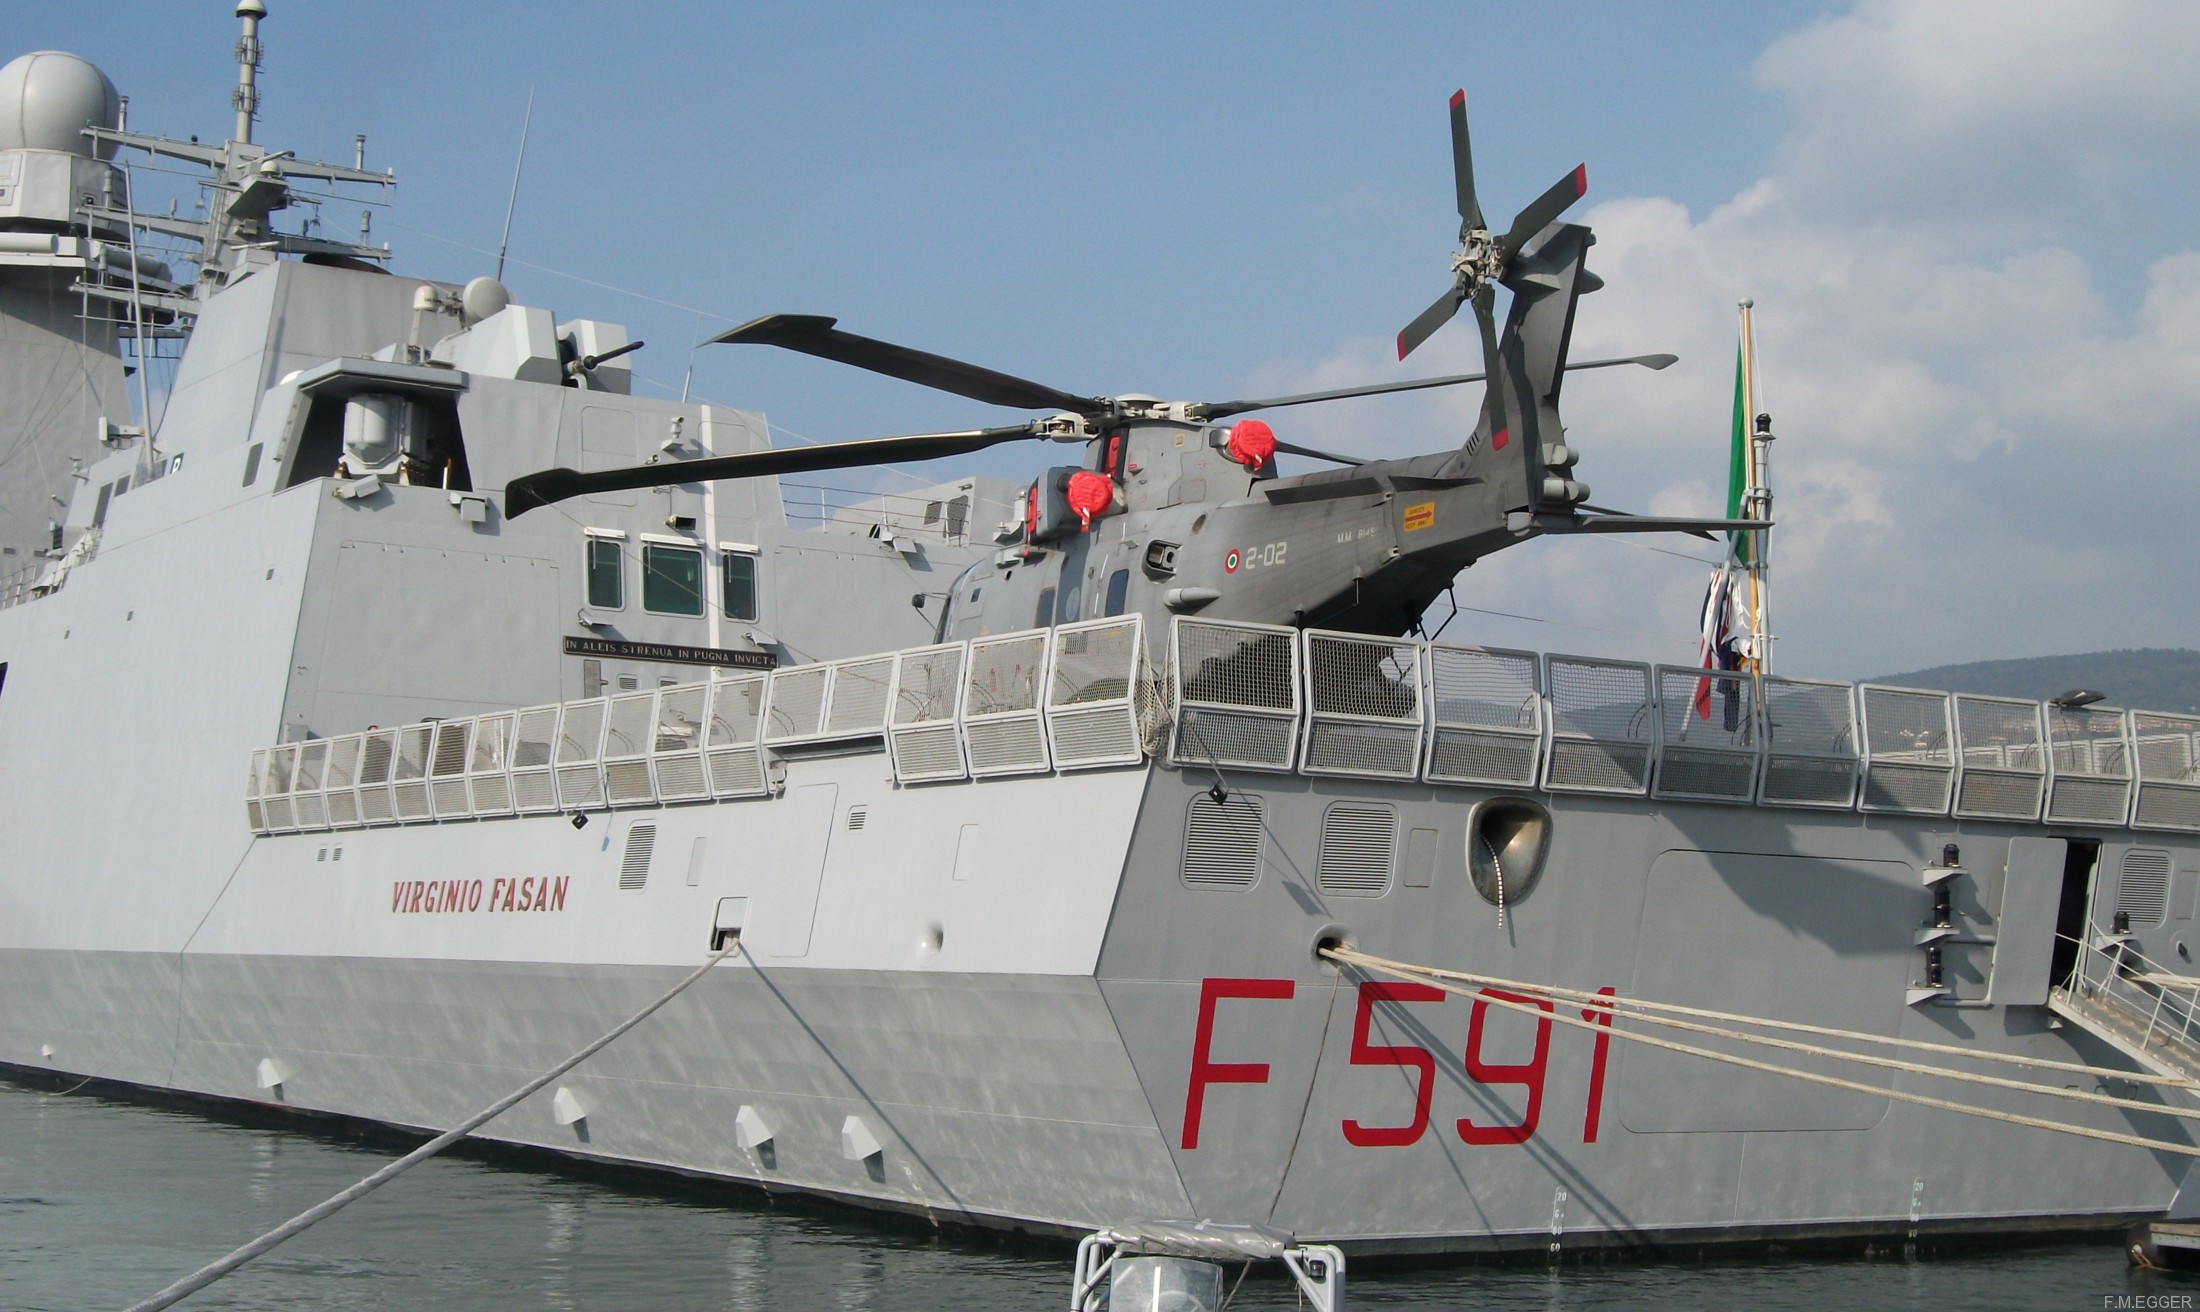 f-591 virginio fasan its nave bergamini fremm class guided missile frigate italian navy marina militare x34 eh-101 helicopter trieste port